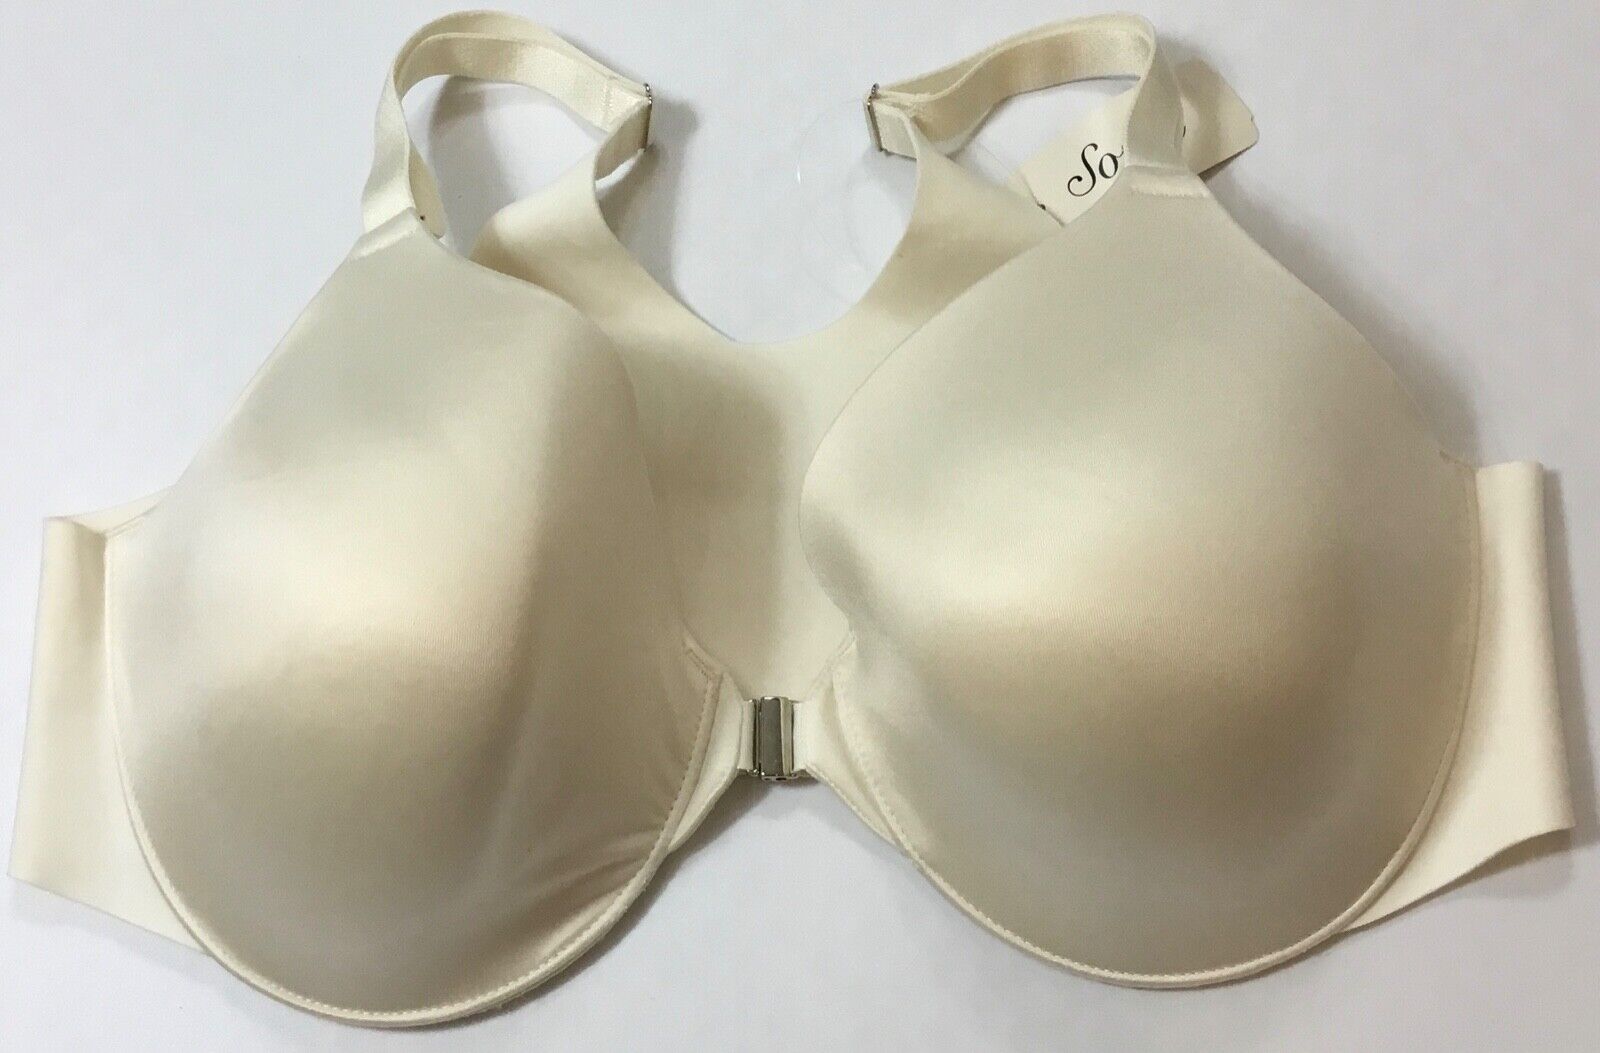 Price reduction Soma Women’s Vanishing Back Front Close 34D Size Max 46% OFF NWT White Bra